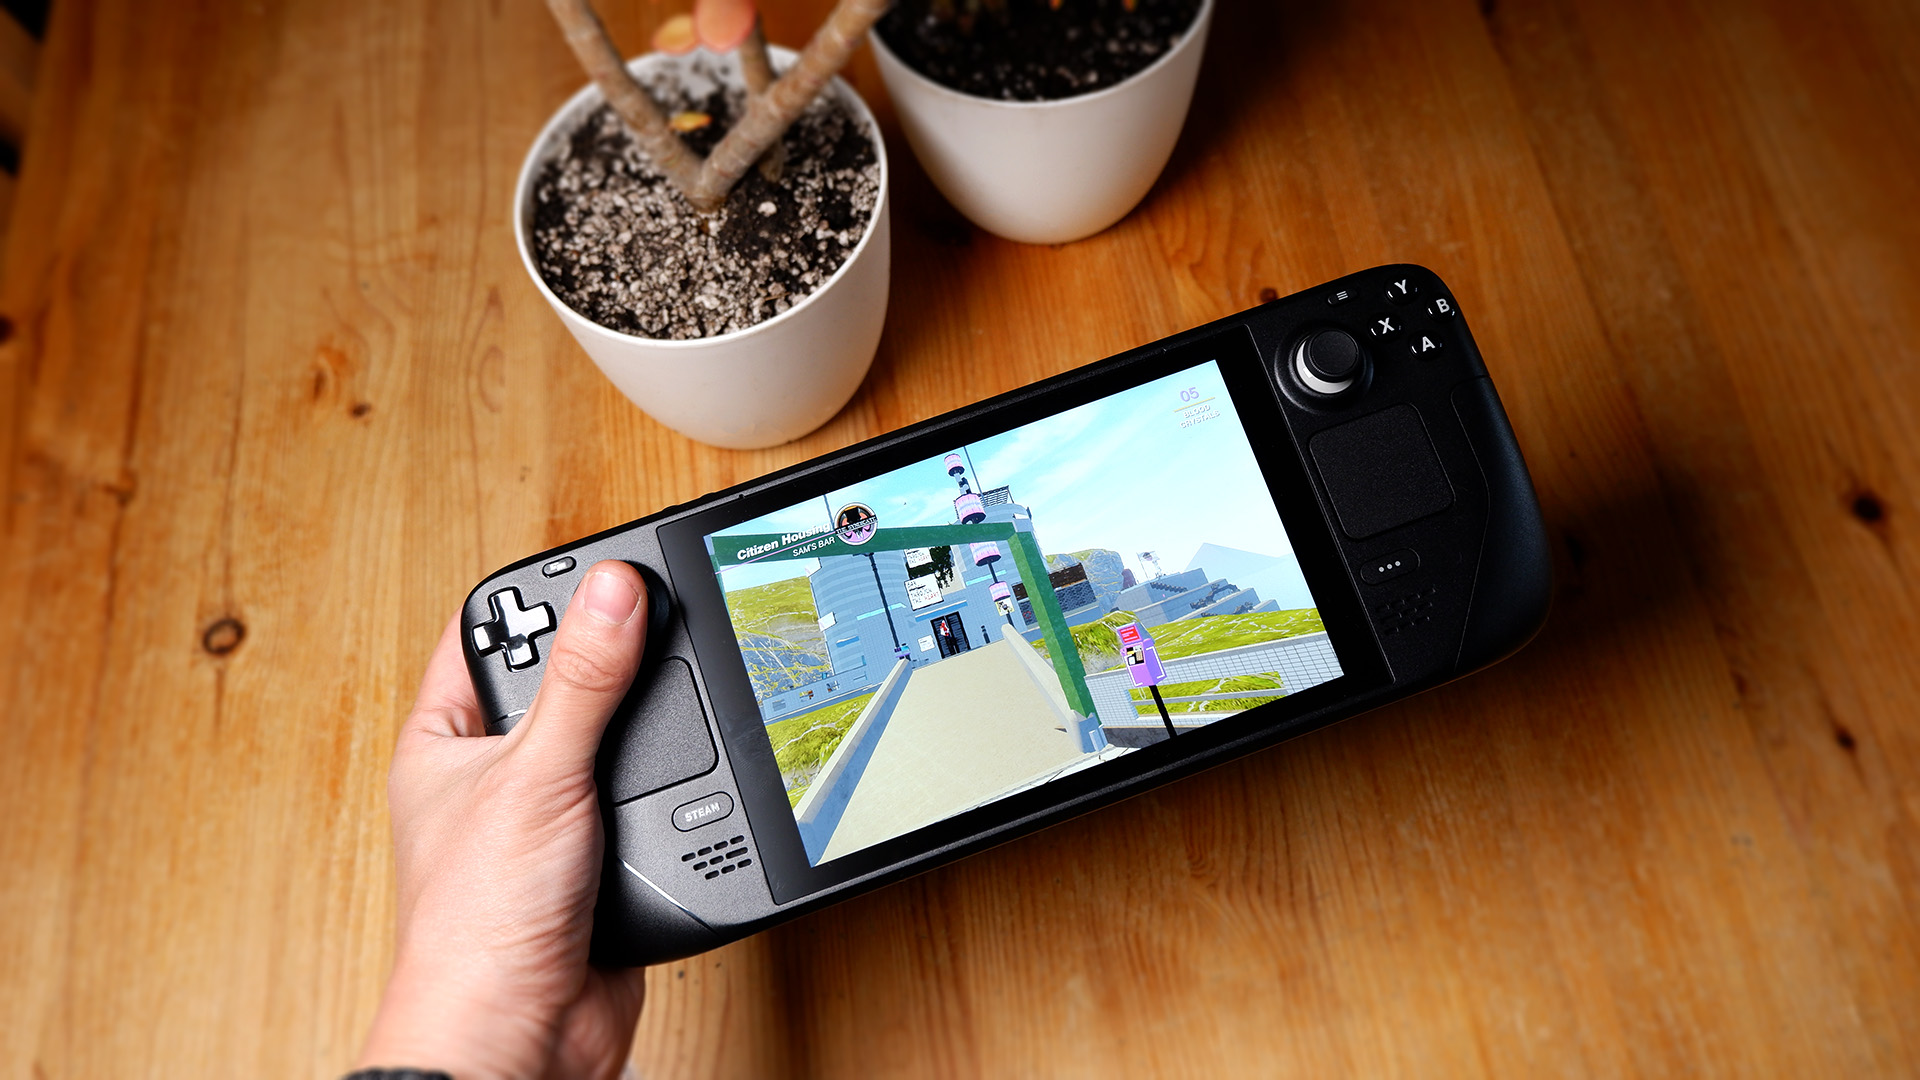 Steam Deck: Valve finally makes powerful gaming handheld freely